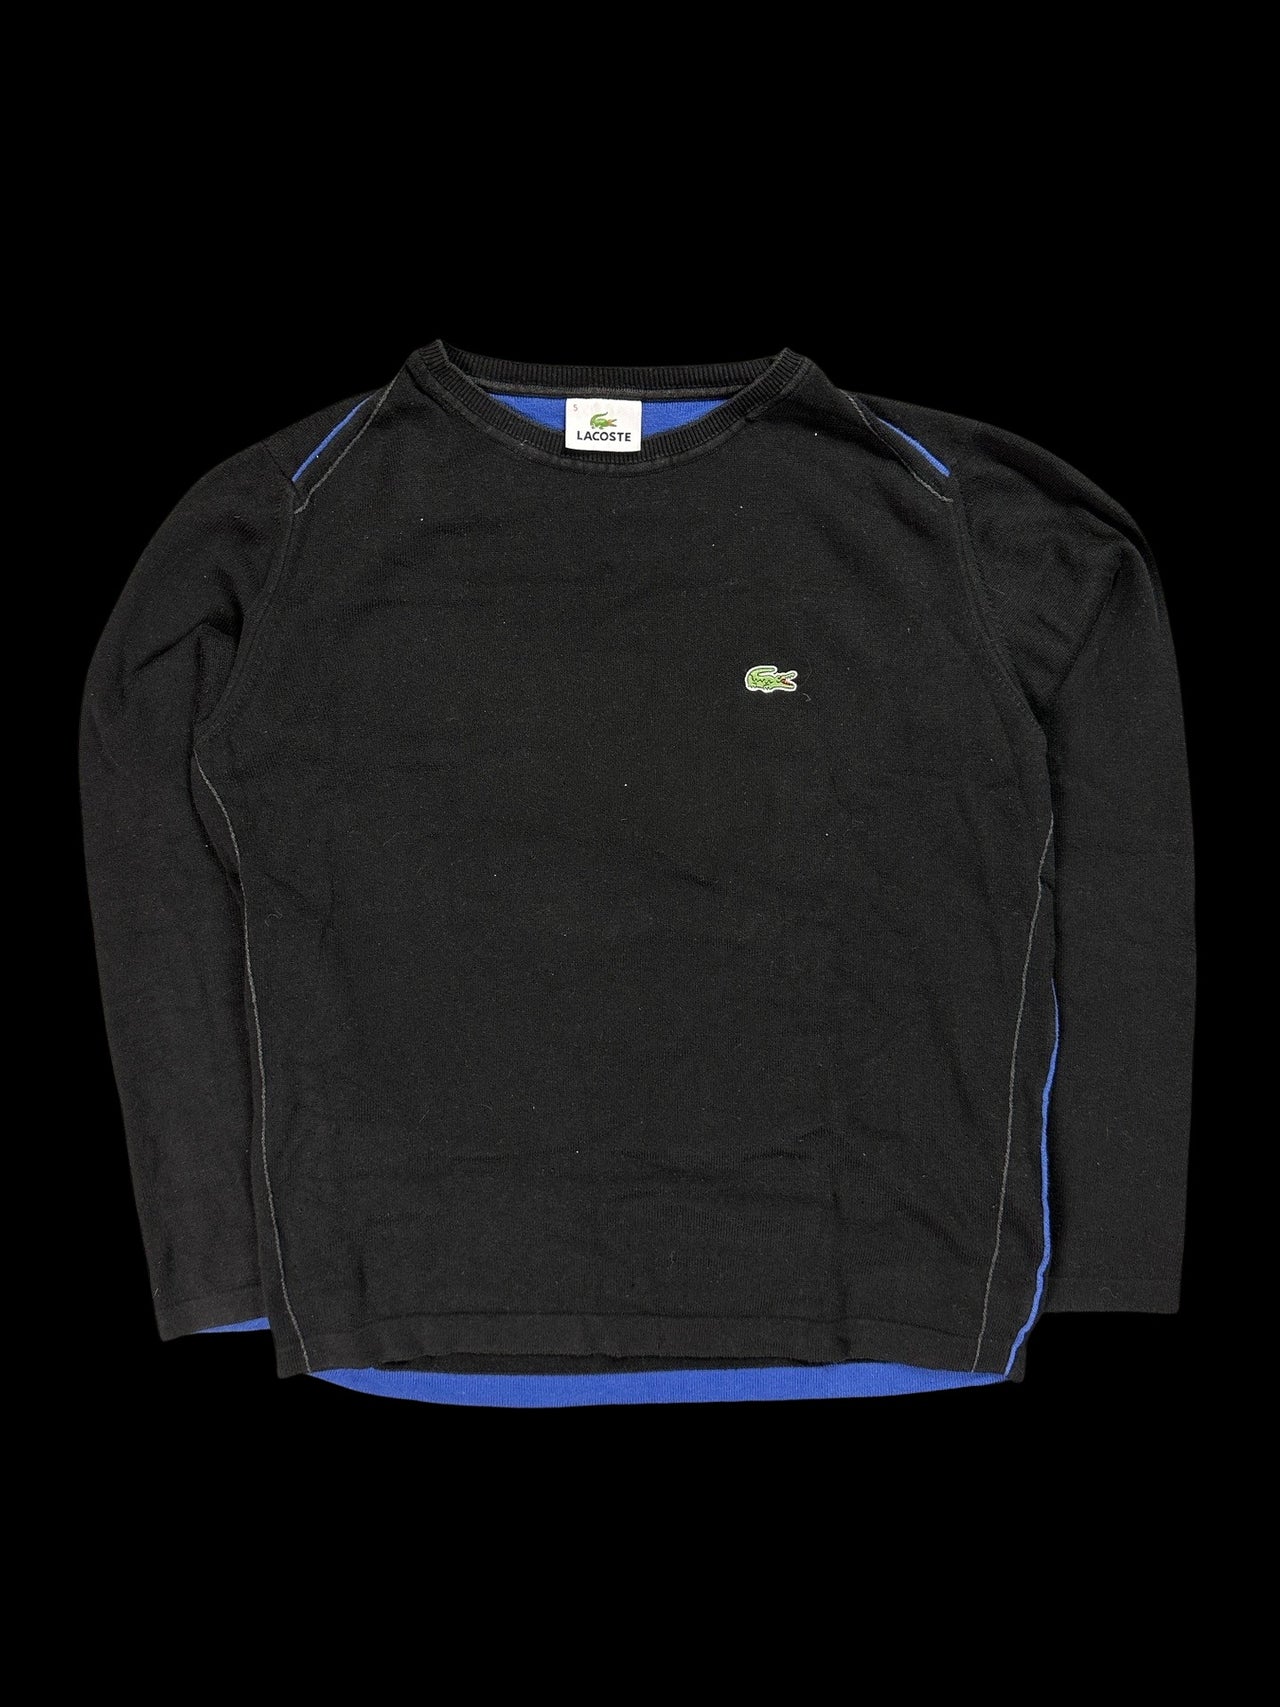 Lacoste Sweater (S-M)